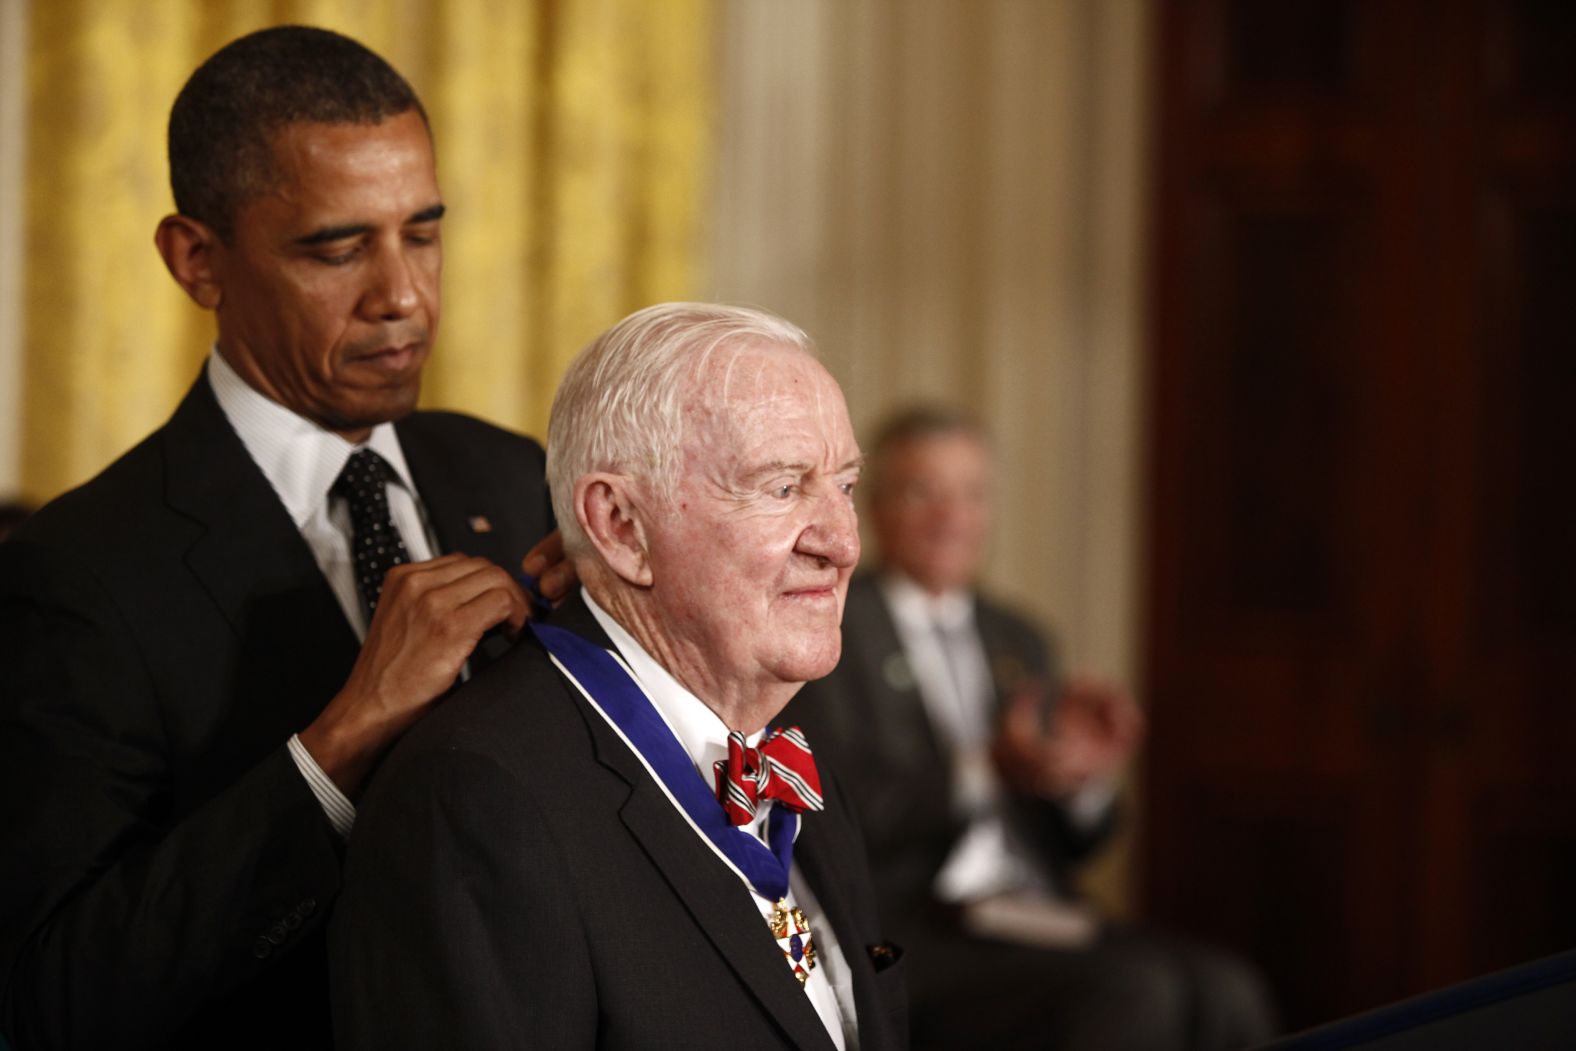 President Barack Obama awards the Presidential Medal of Freedom to Stevens during a ceremony in the East Room of the White House on May 29, 2012. The award is the nation's highest civilian honor.